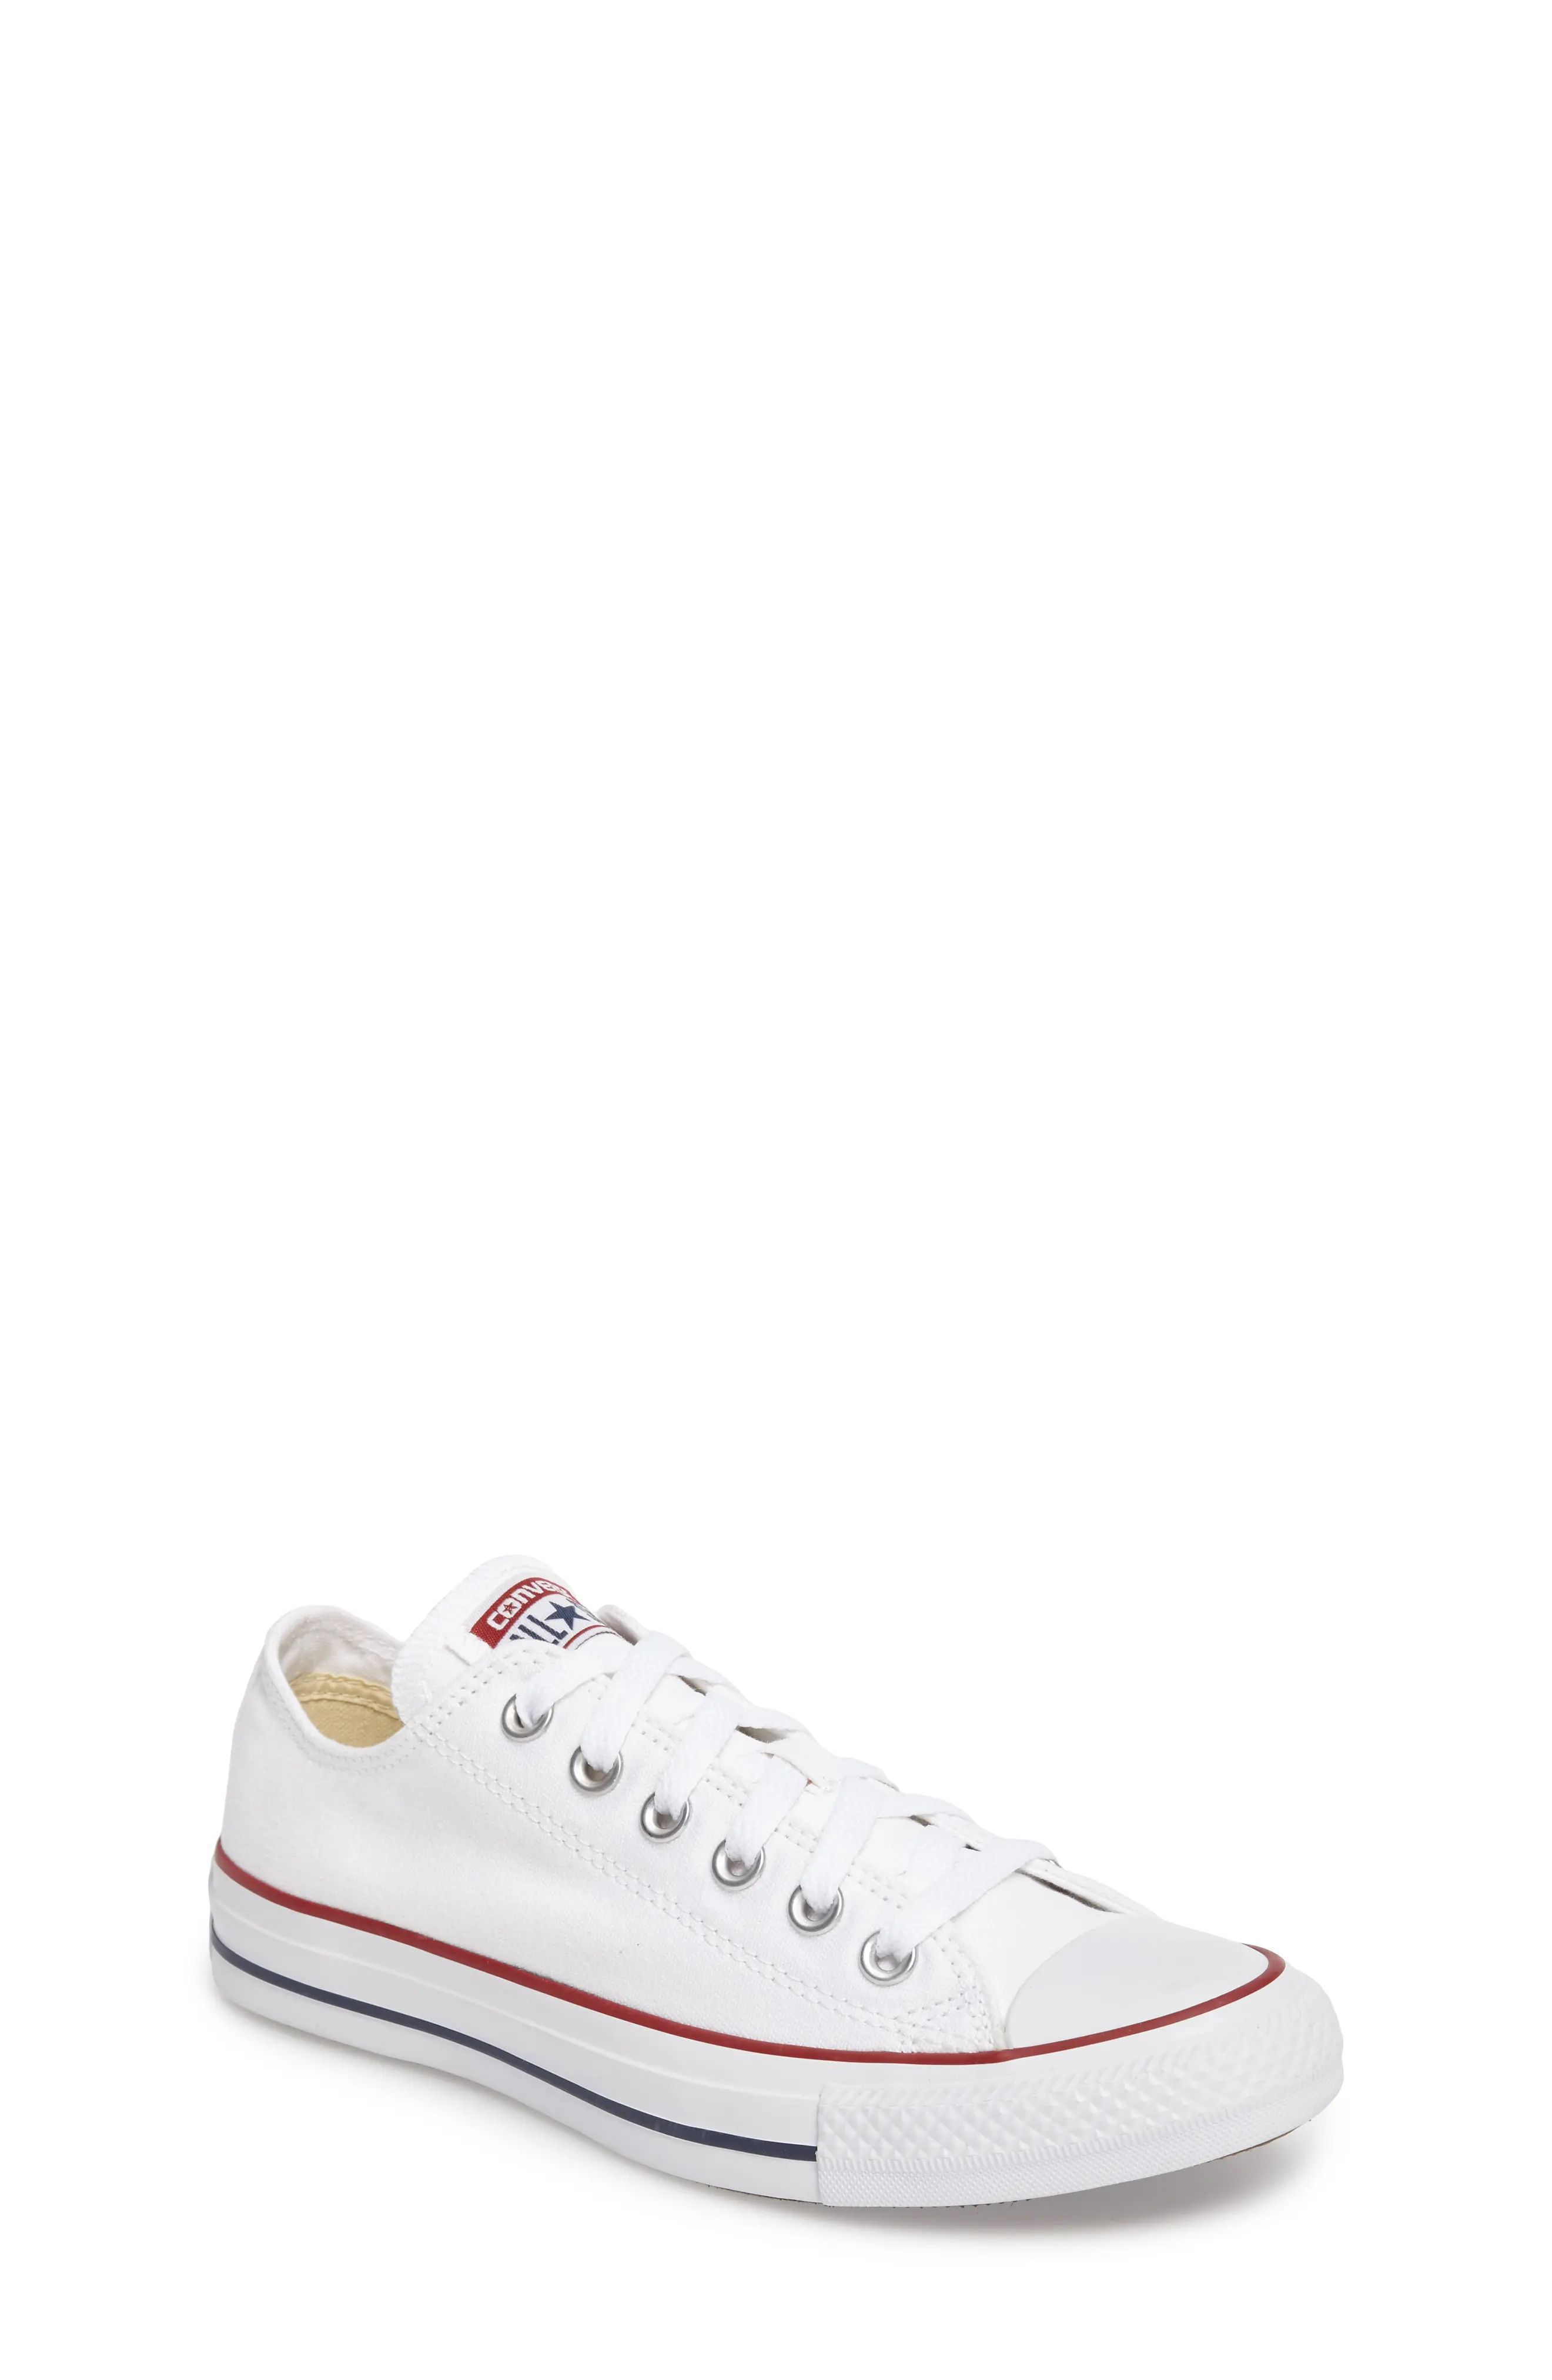 Toddler Converse Chuck Taylor Sneaker, Size 11 M - White | Nordstrom